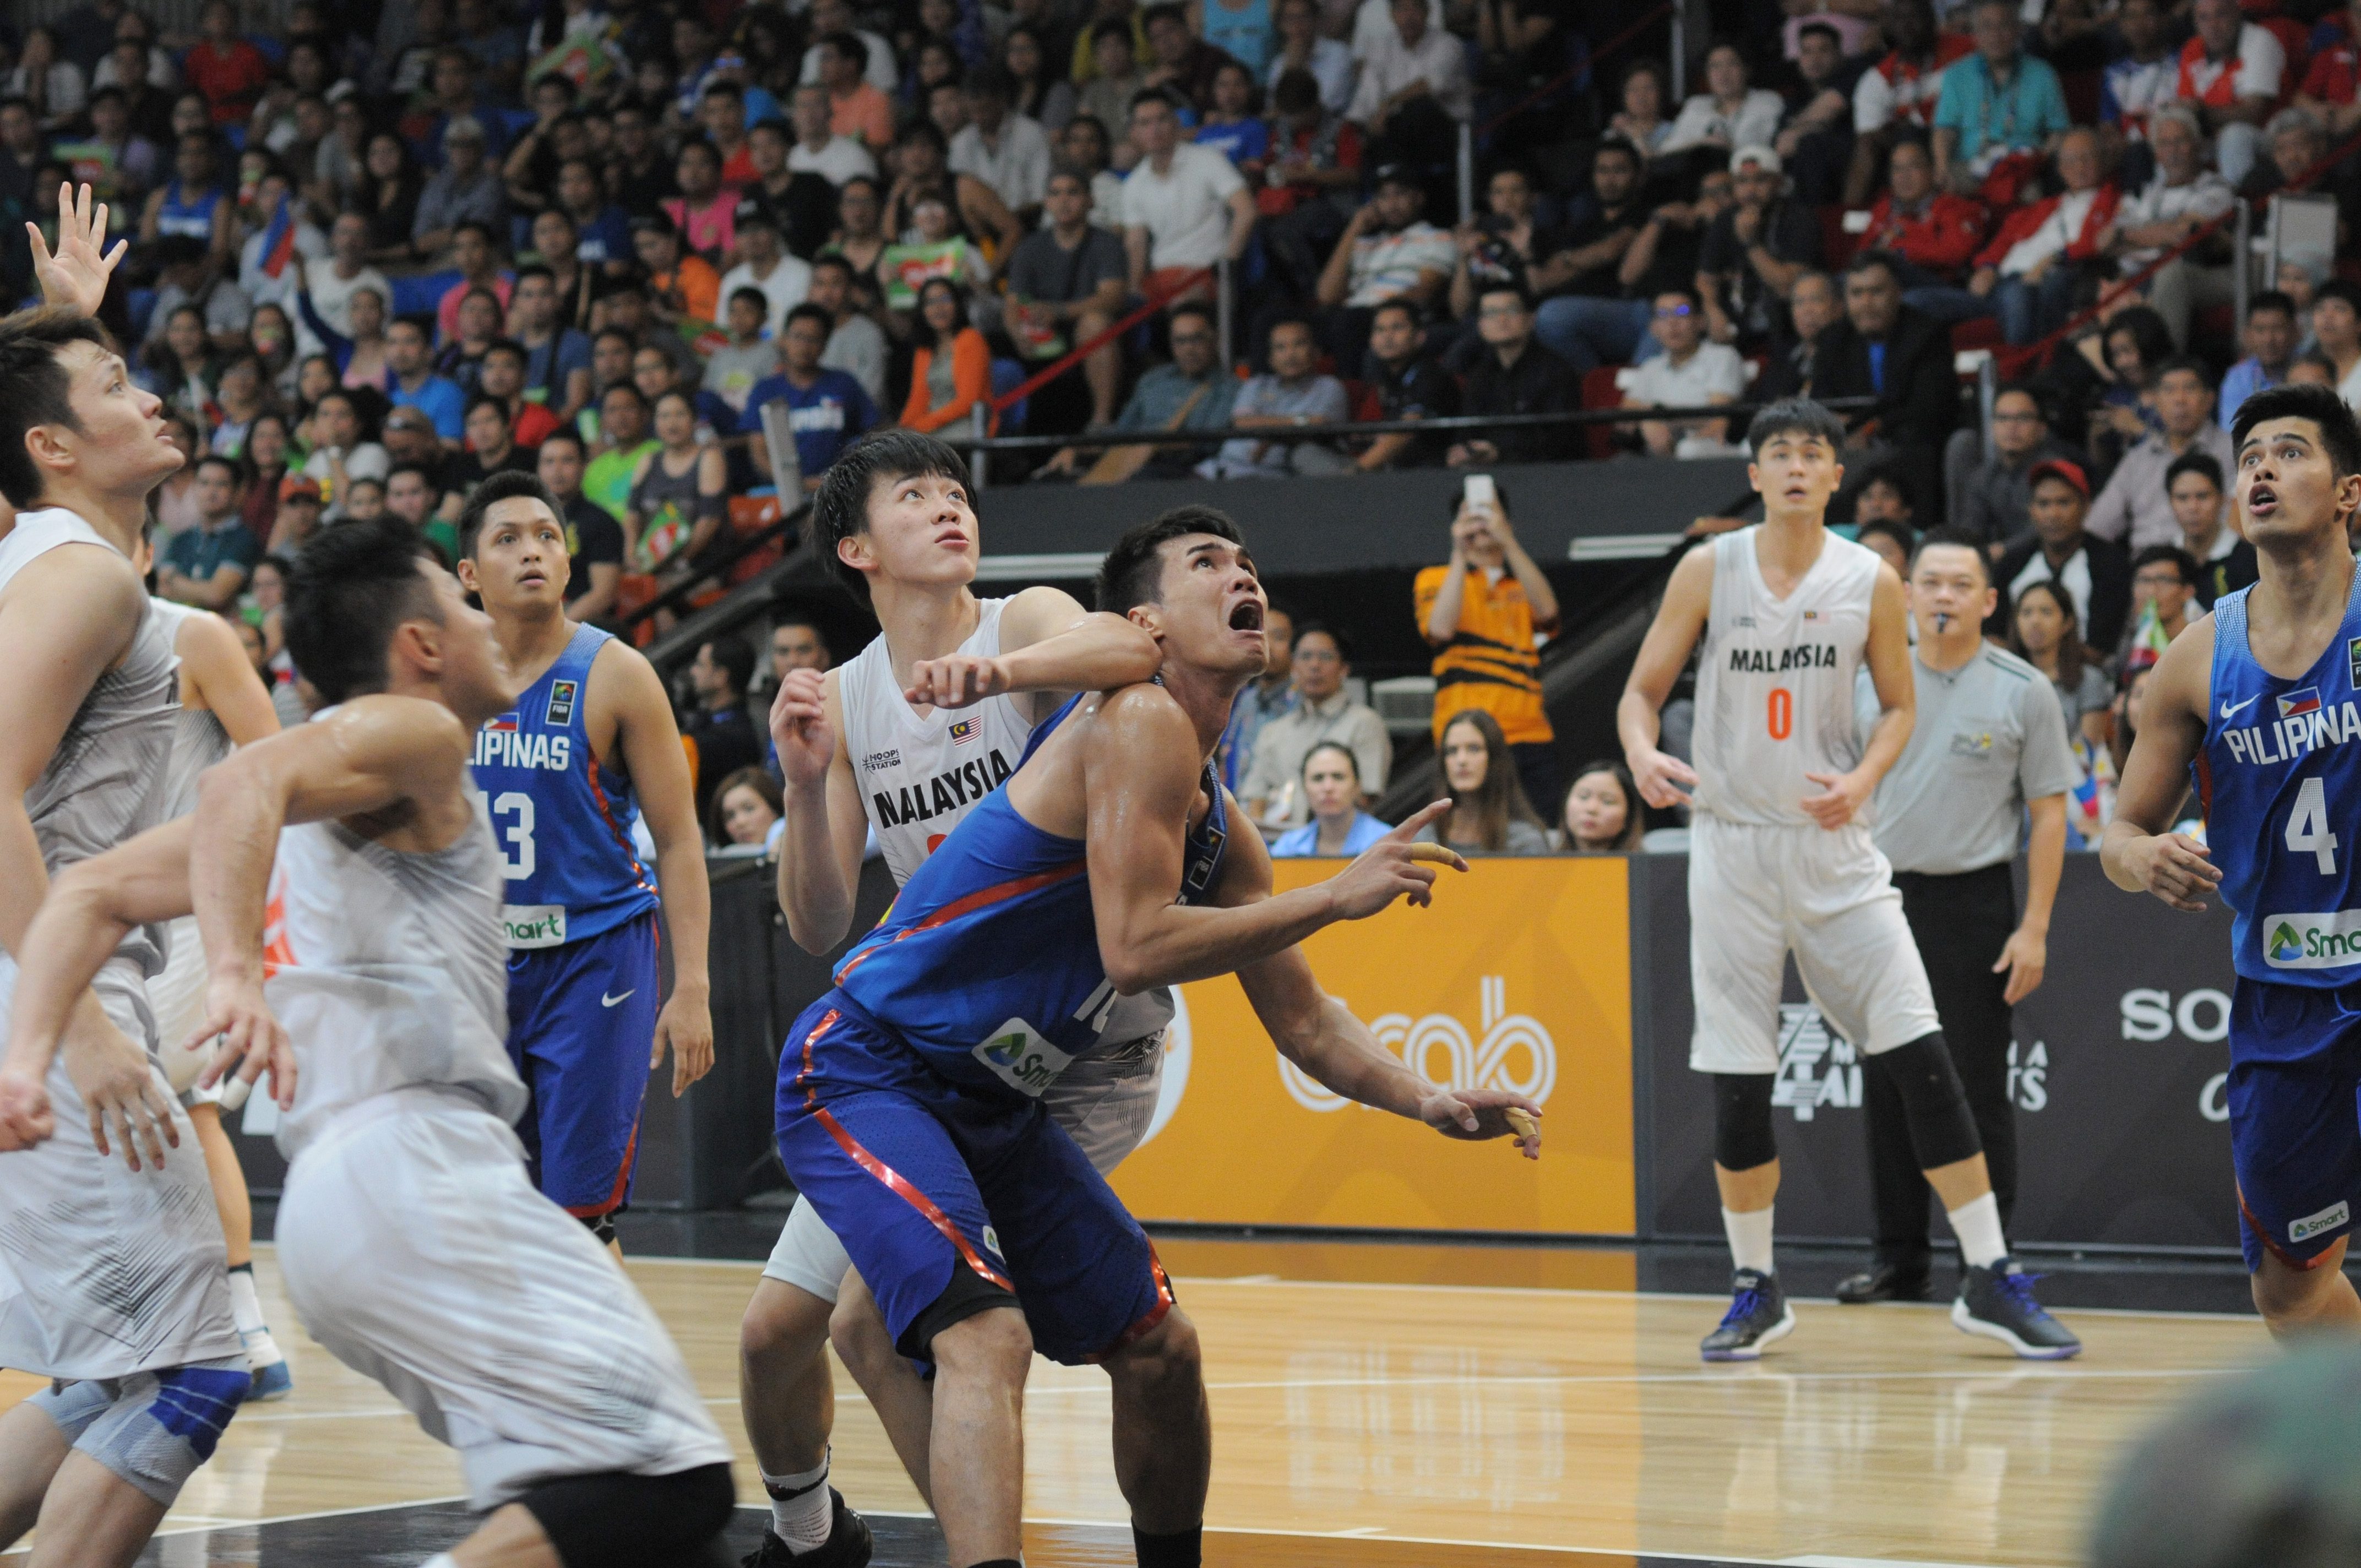 Troy Rosario and a Malaysian play jostle for position. Photo by Adrian Portugal/Rappler  